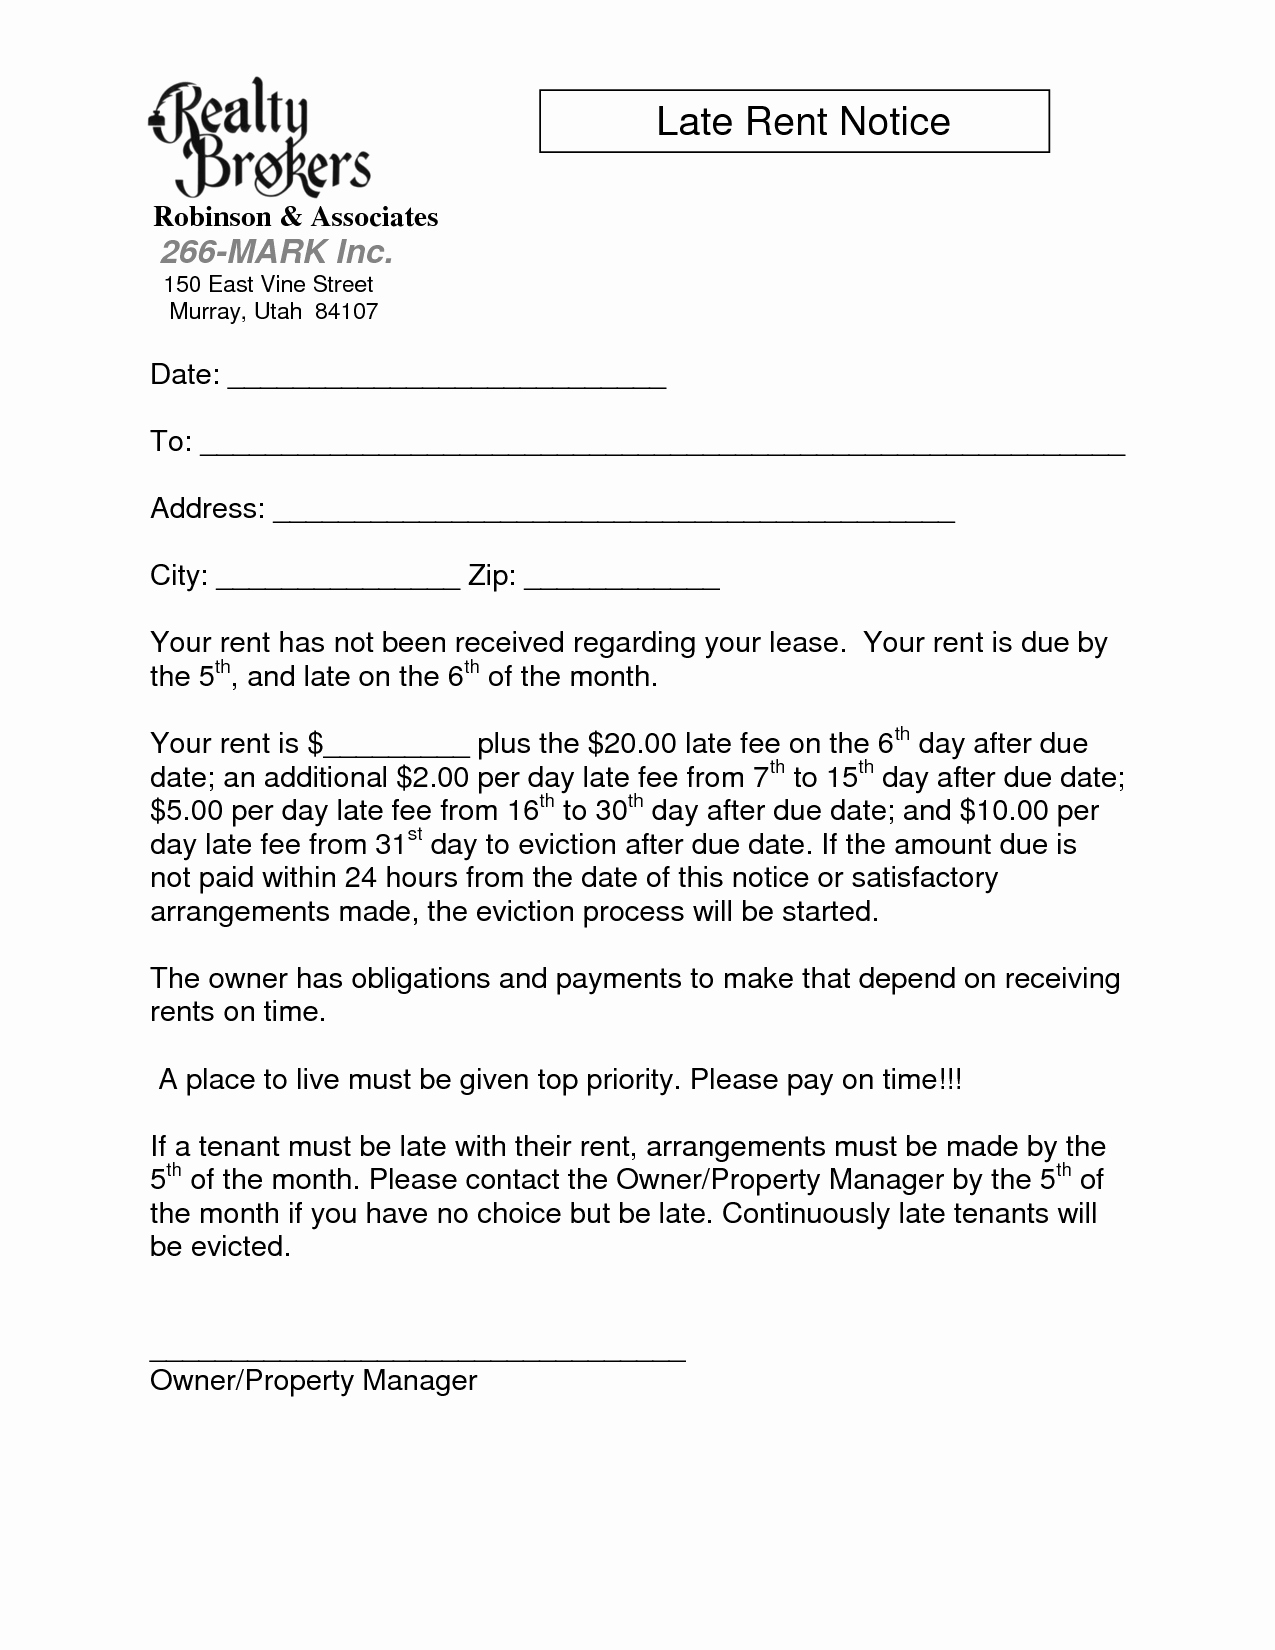 Late Notice for Rent Letter Awesome Late Rent Notice Template Images Sample Late Rent Notice